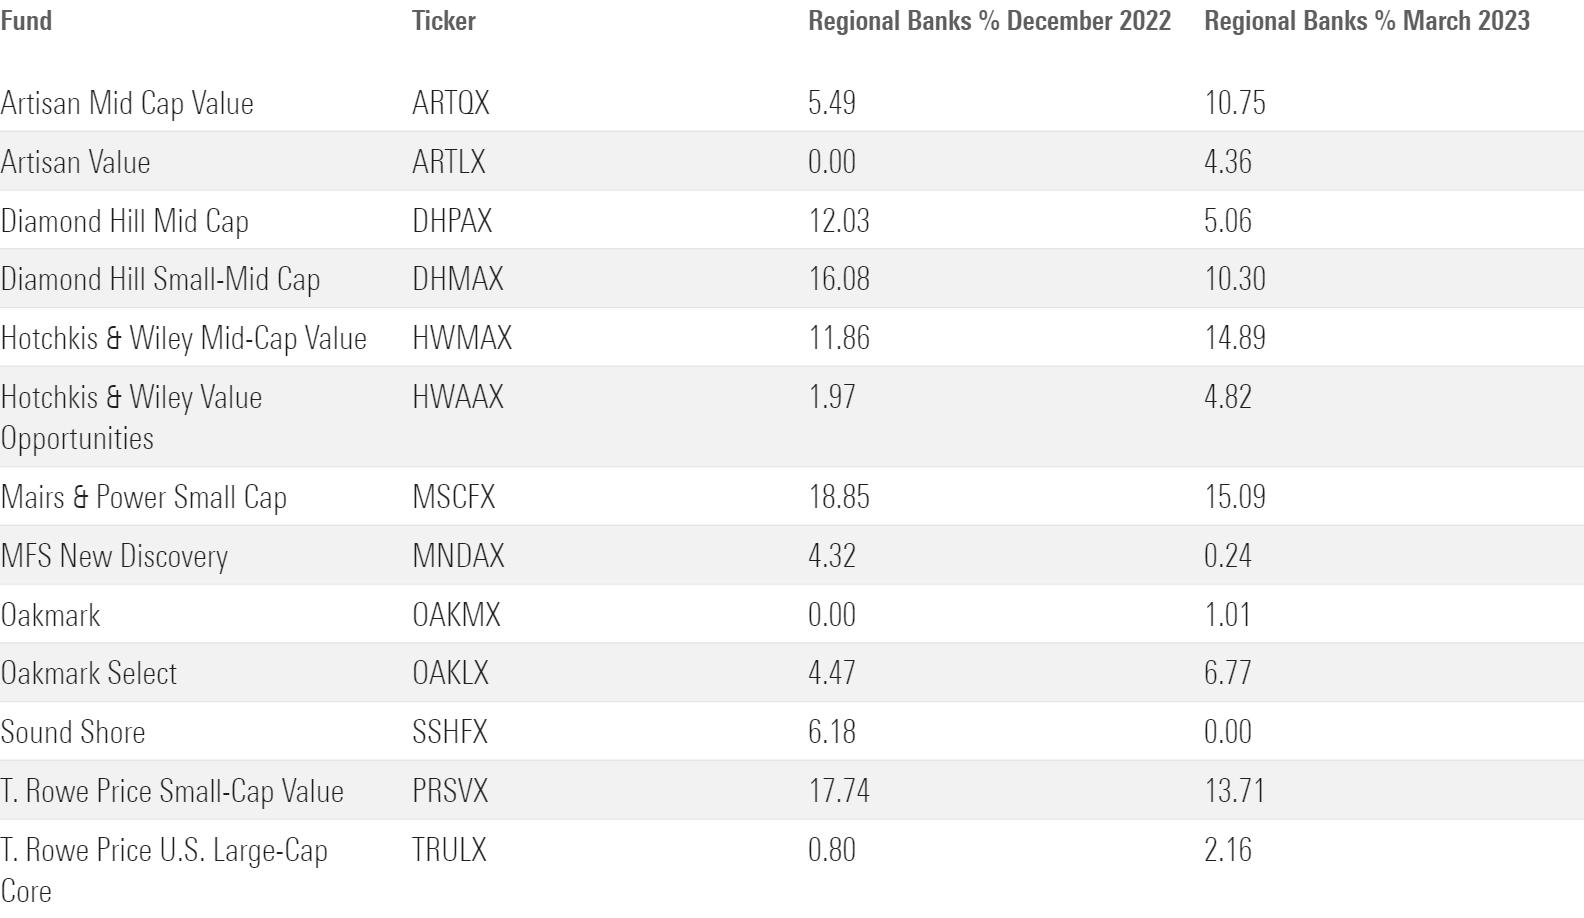 A table of selected funds' regional bank holdings in December 2022 versus March 2023.